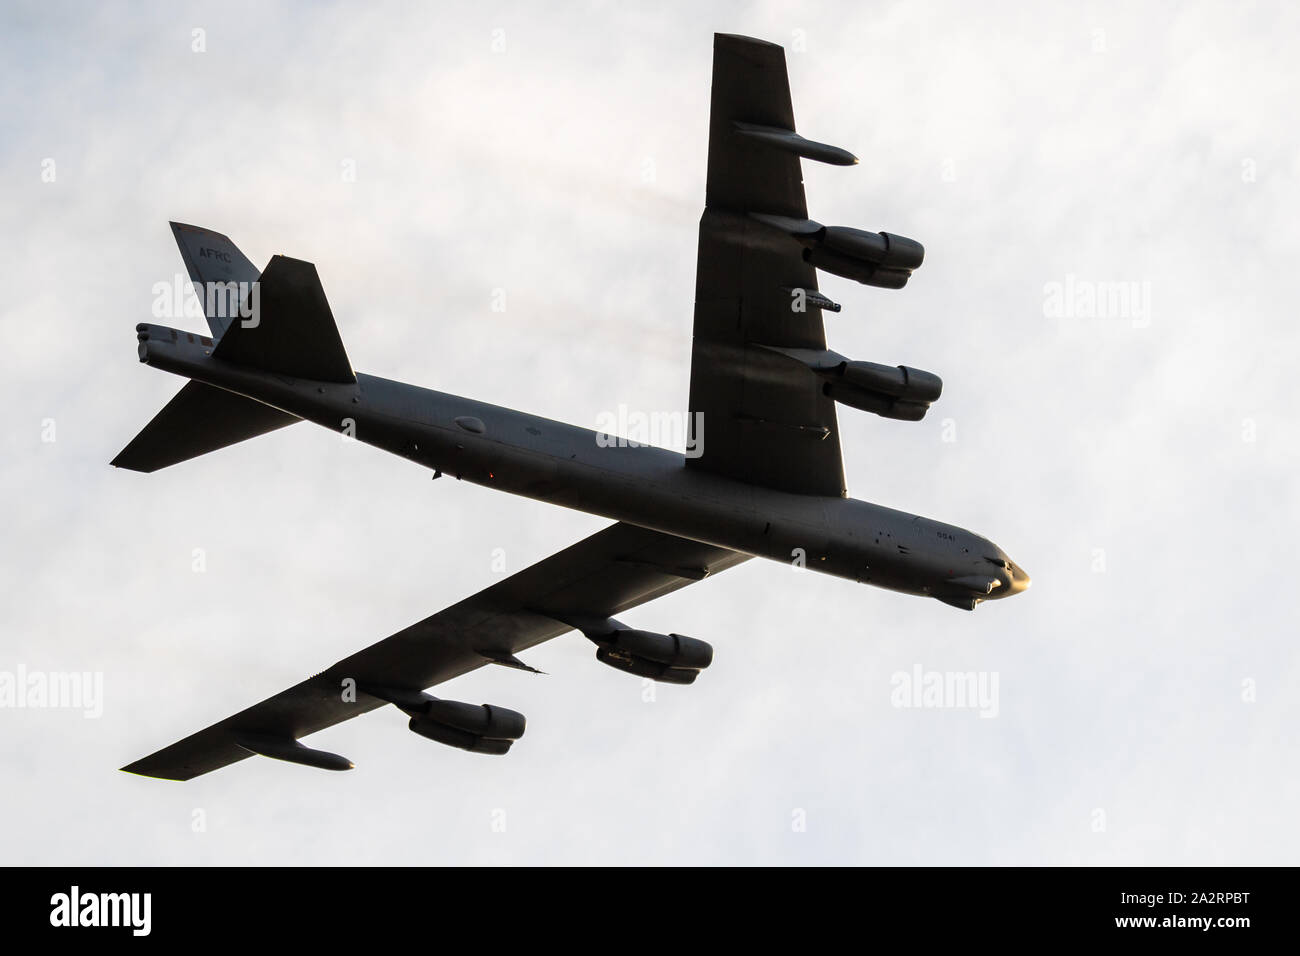 SANICOLE, BELGIUM - SEP 13, 2019: US Air Force Boeing B-52 Stratofortress bomer plane performing a low-pass at the Sanice Sunset Airshow. Stock Photo